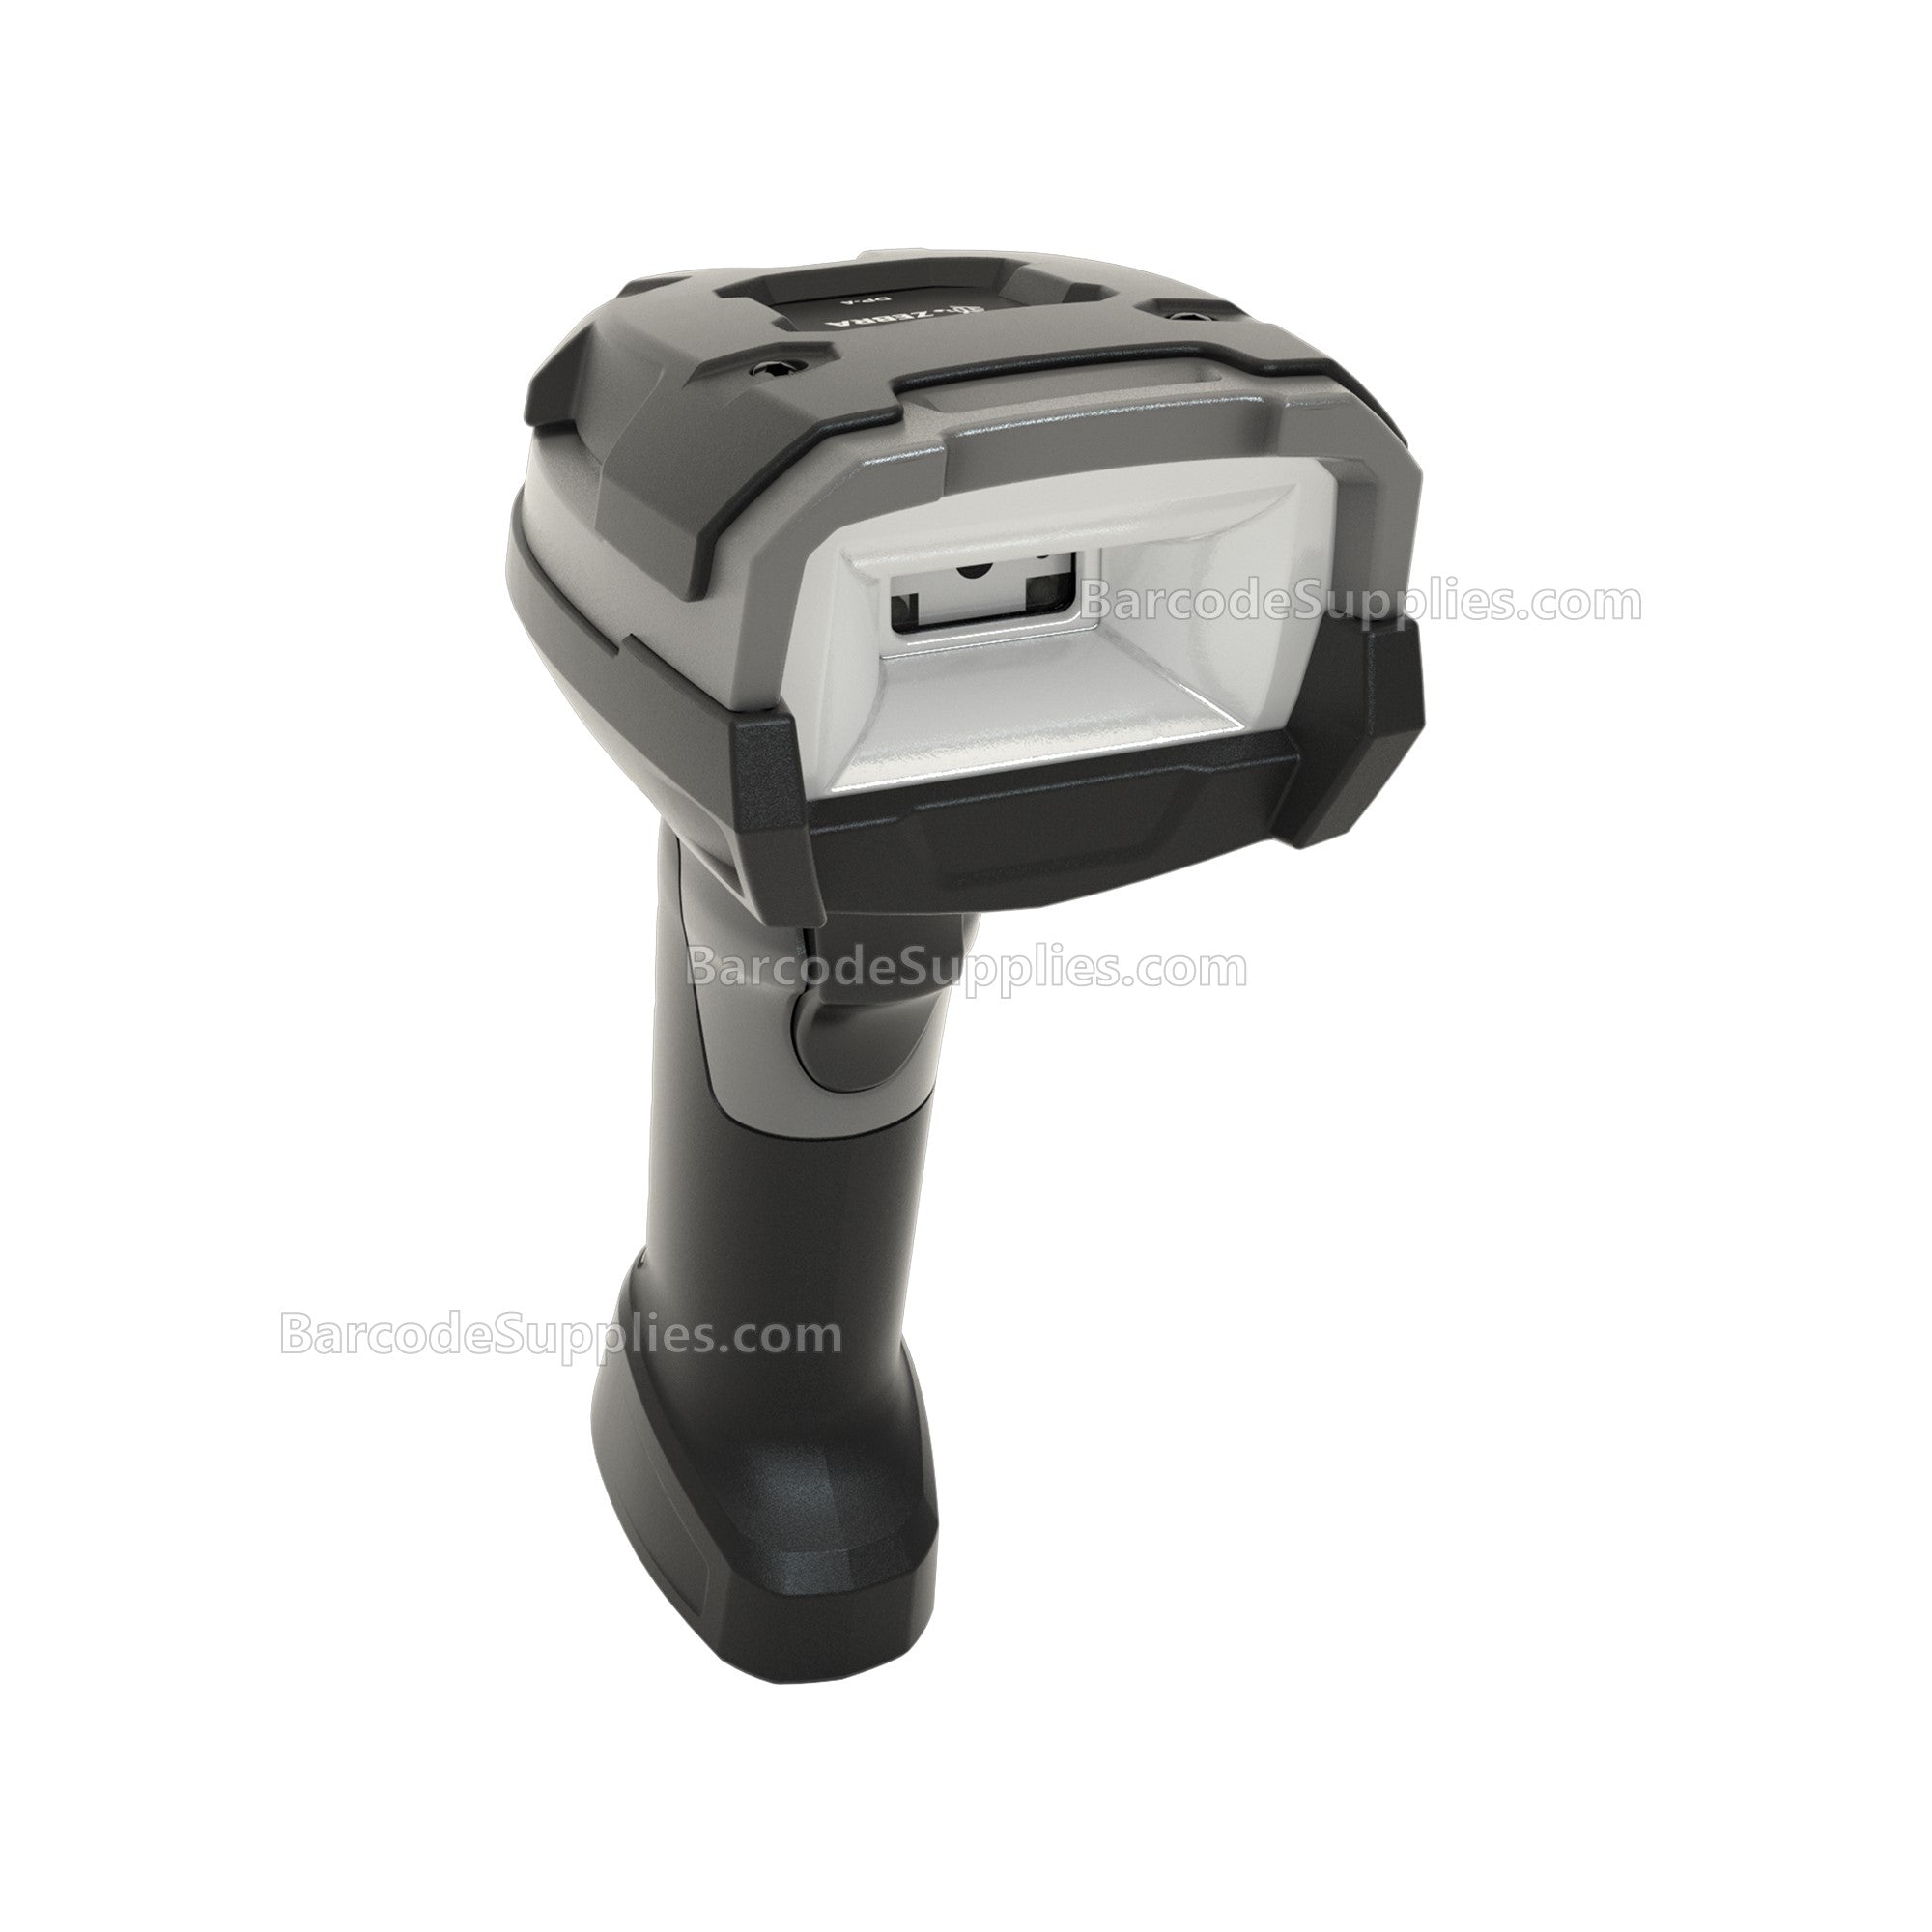 Zebra DS3678: RUGGED, AREA IMAGER, DIRECT PART MARK, INDUSTRIAL FOCUS, CORDLESS, FIPS, GRAY, VIBRATION MOTOR